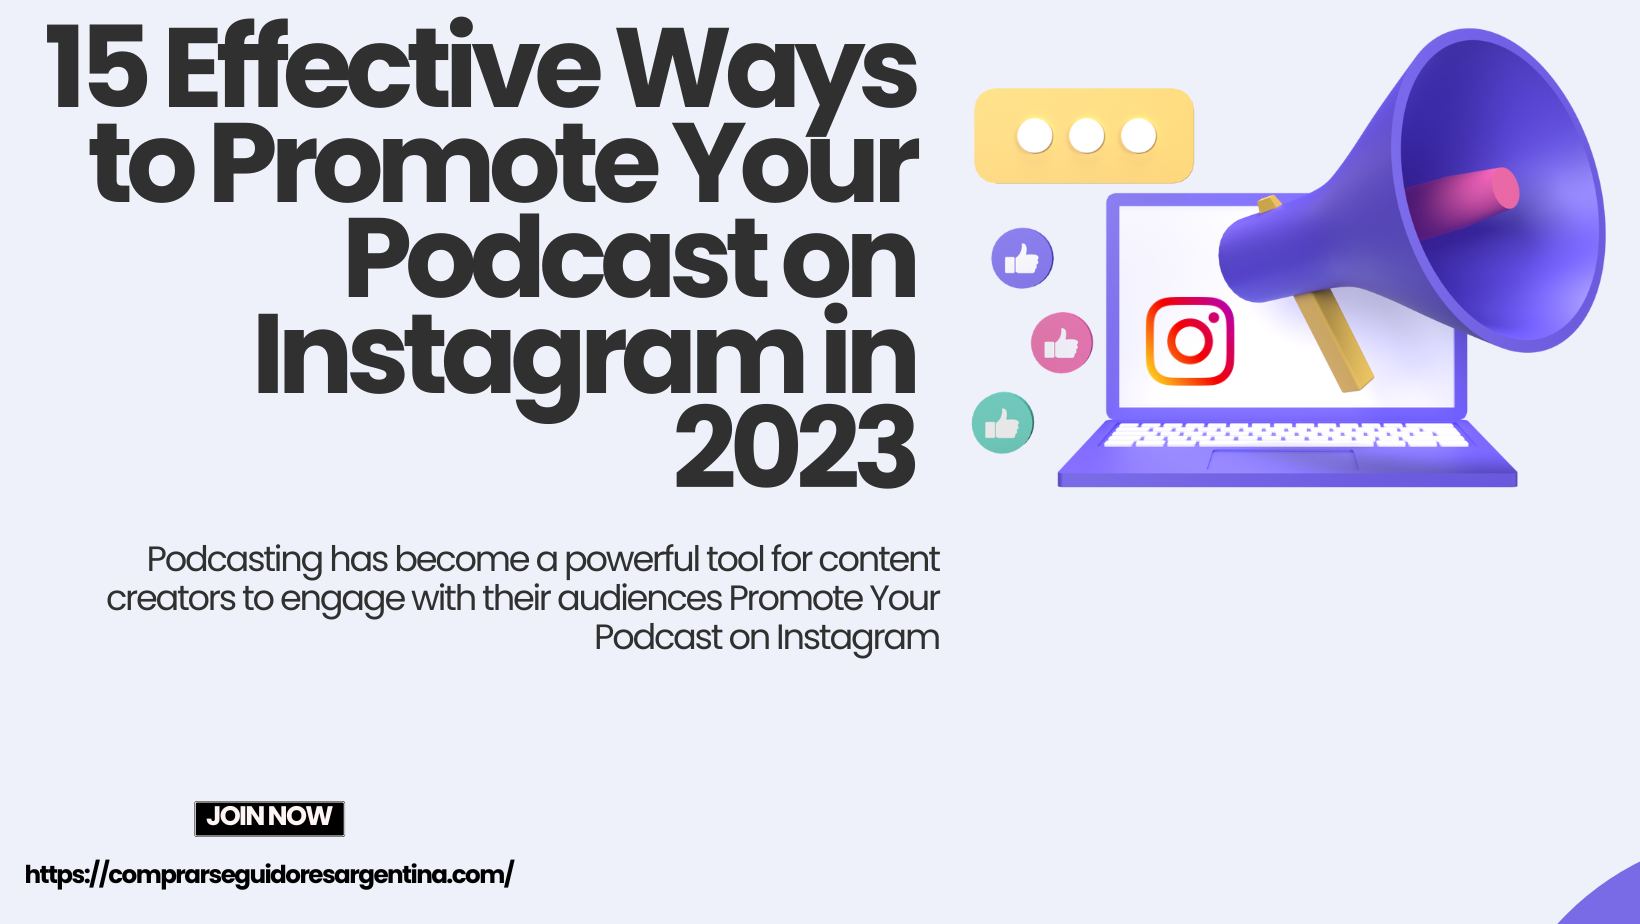 15 Effective Ways to Promote Your Podcast on Instagram in 2023